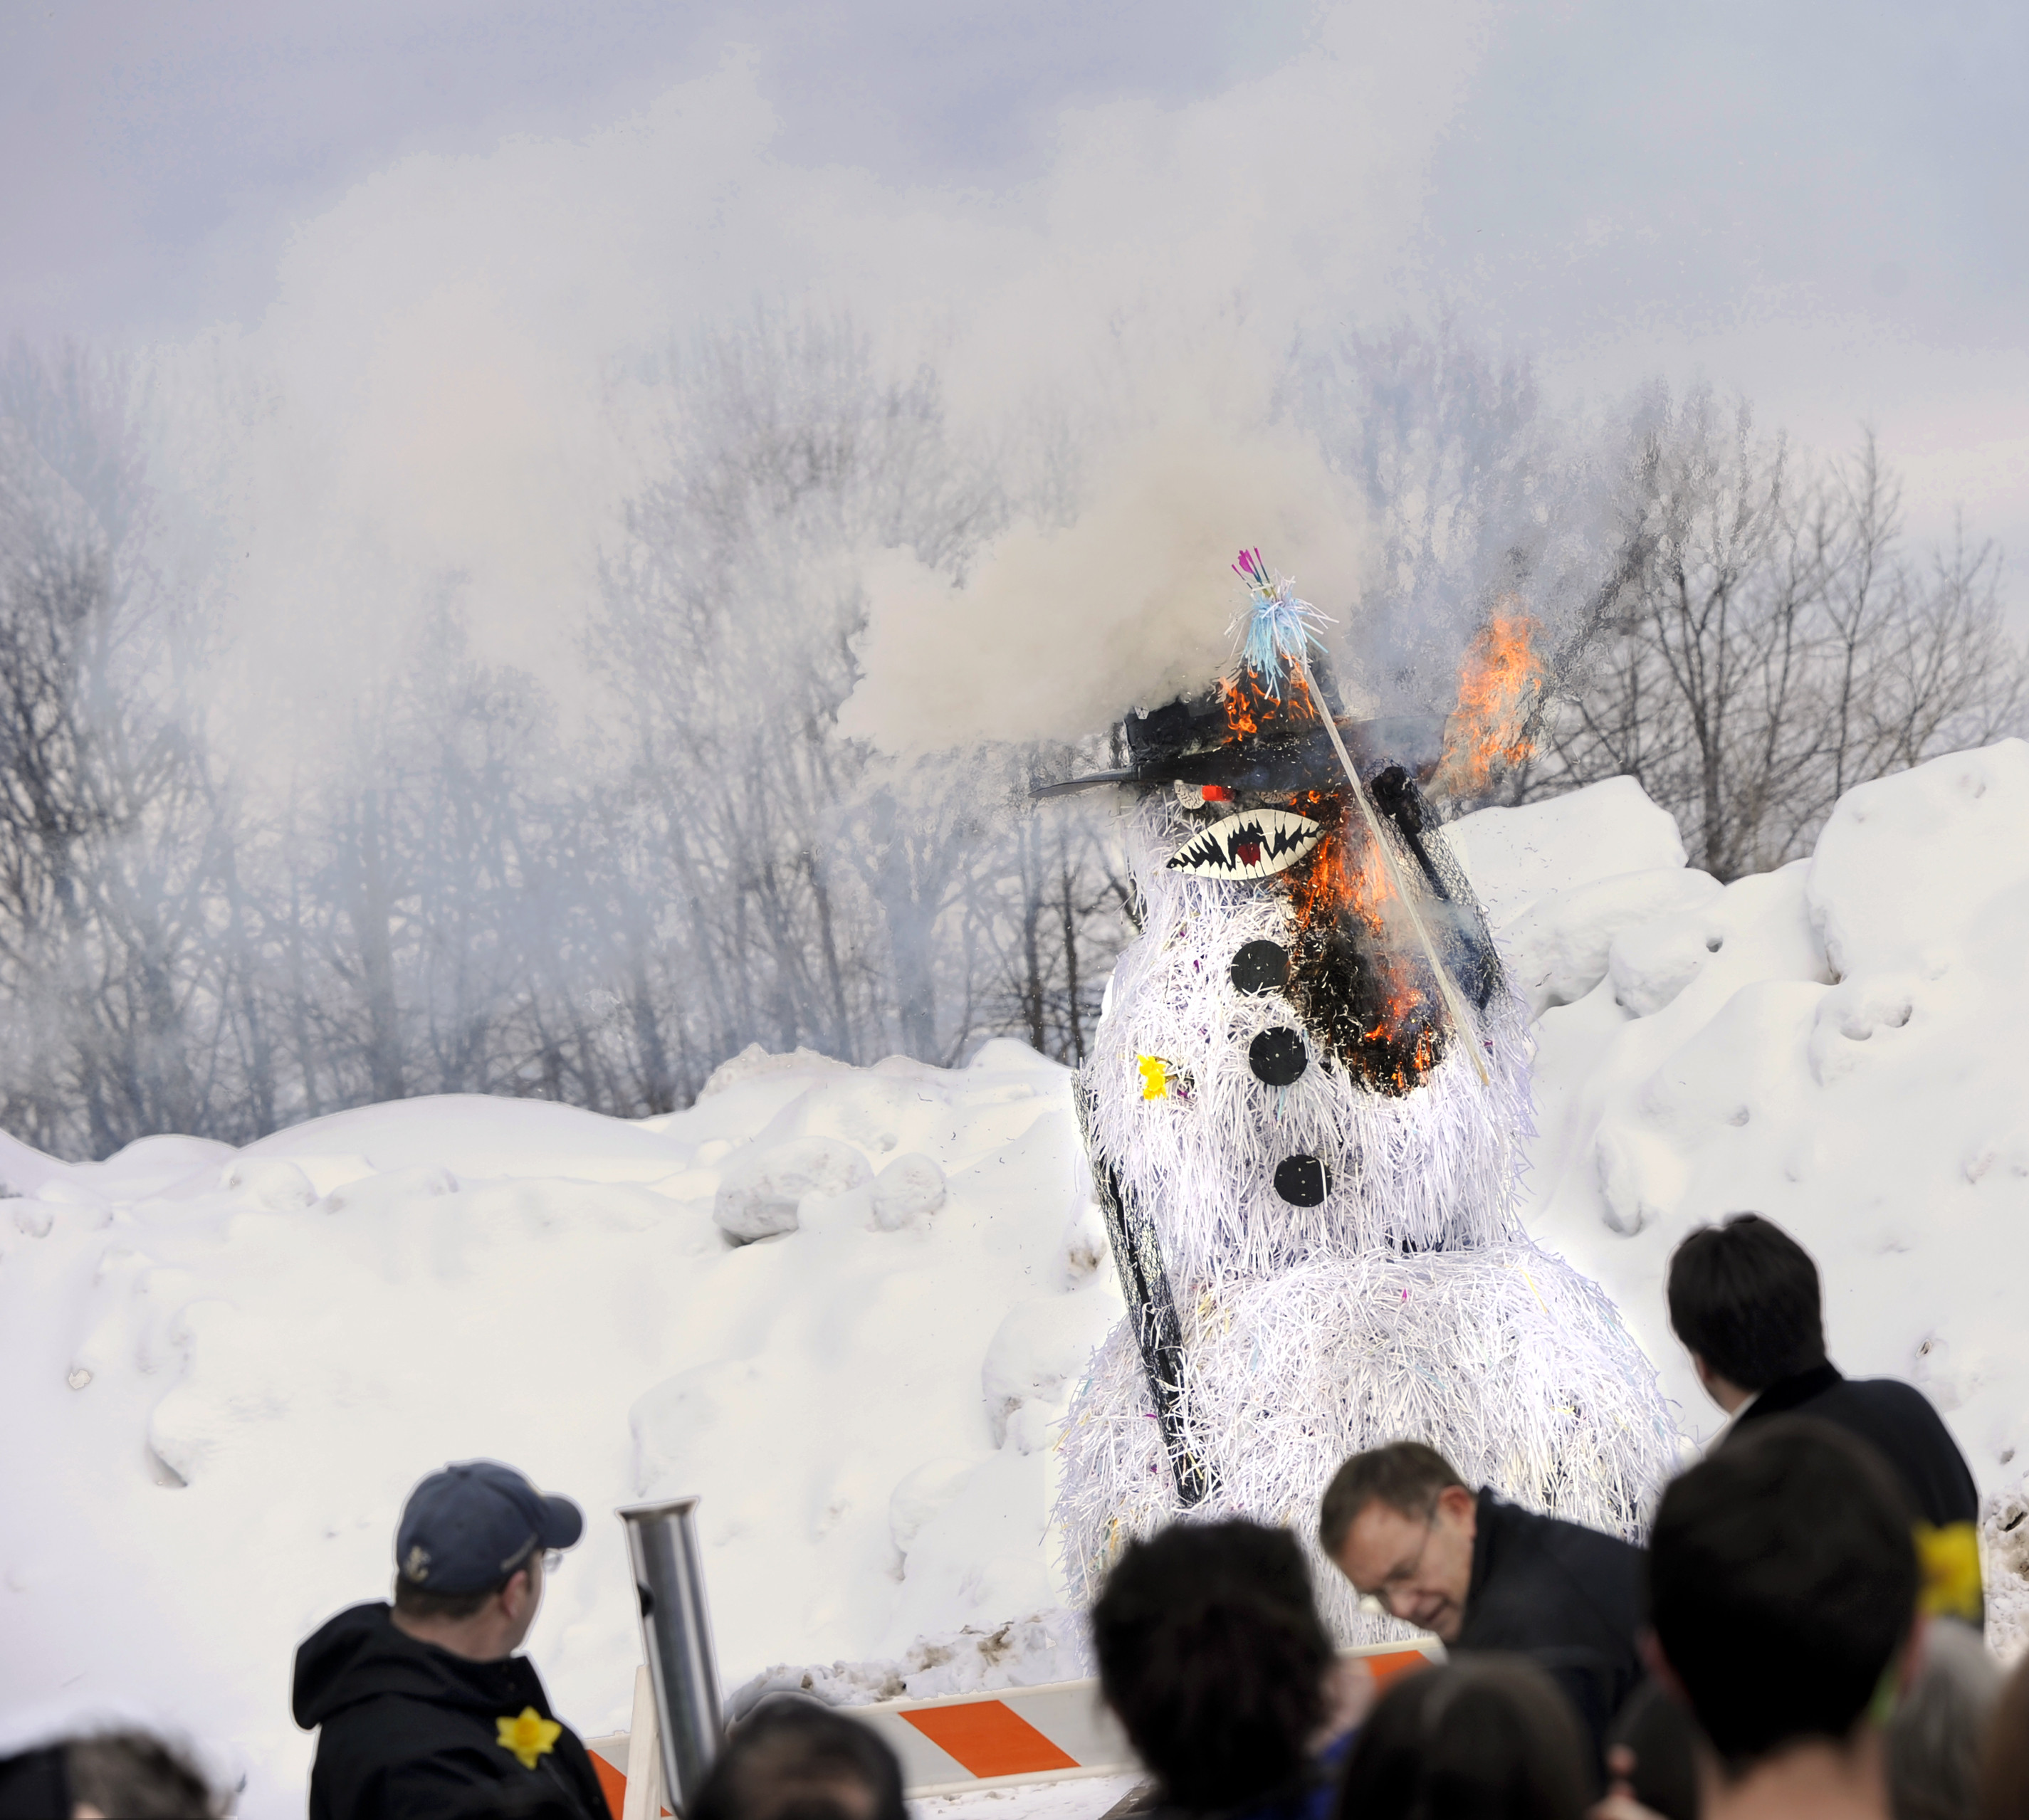 University's Tradition Of Burning A Snowman Is The Best Way To